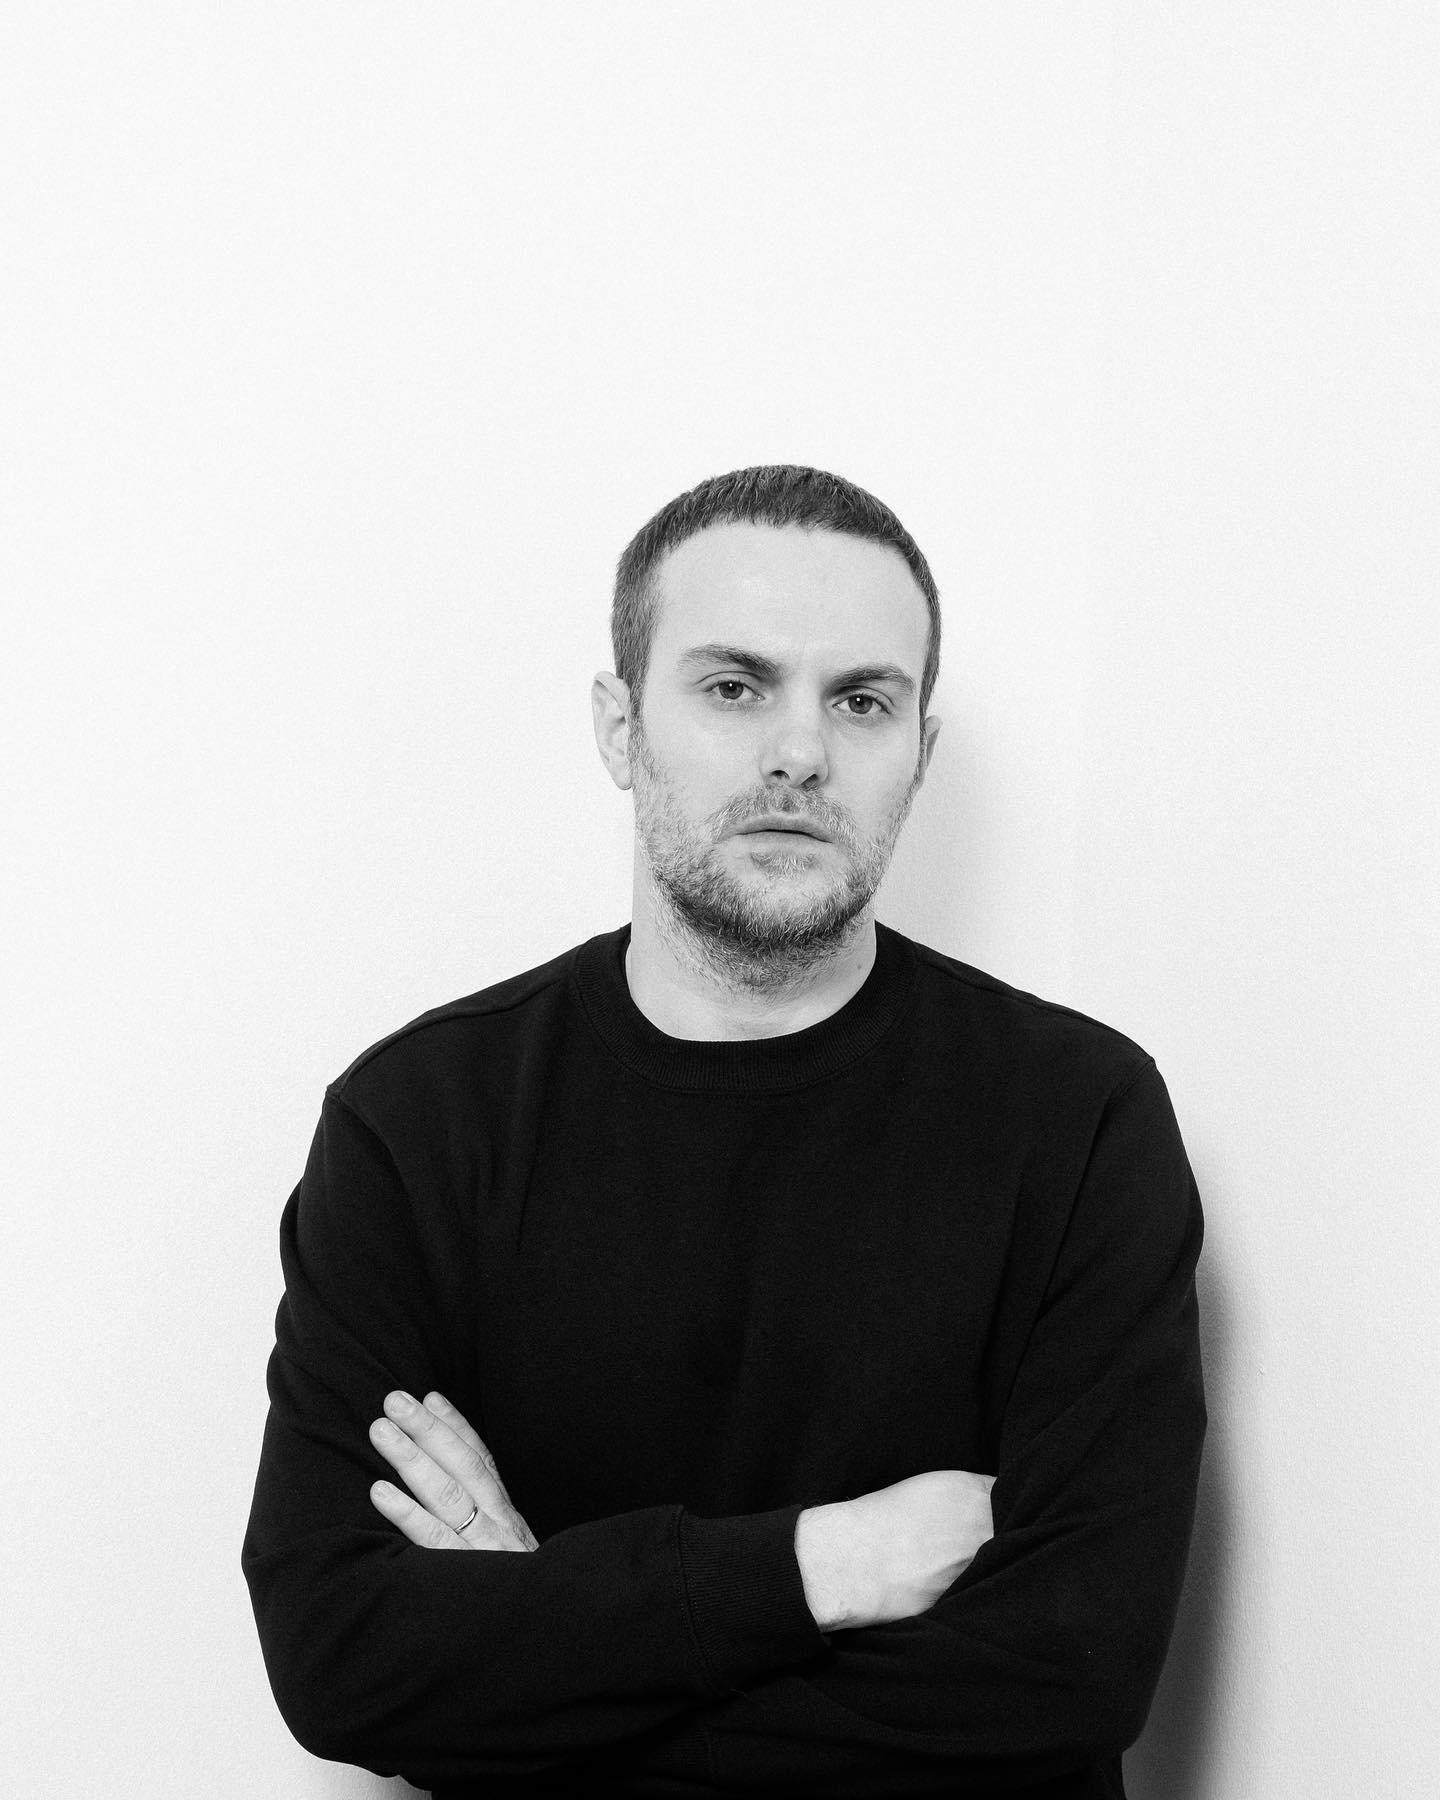 image  1 Gucci and Kering are pleased to announce that Sabato De Sarno will assume the role of Creative Direc